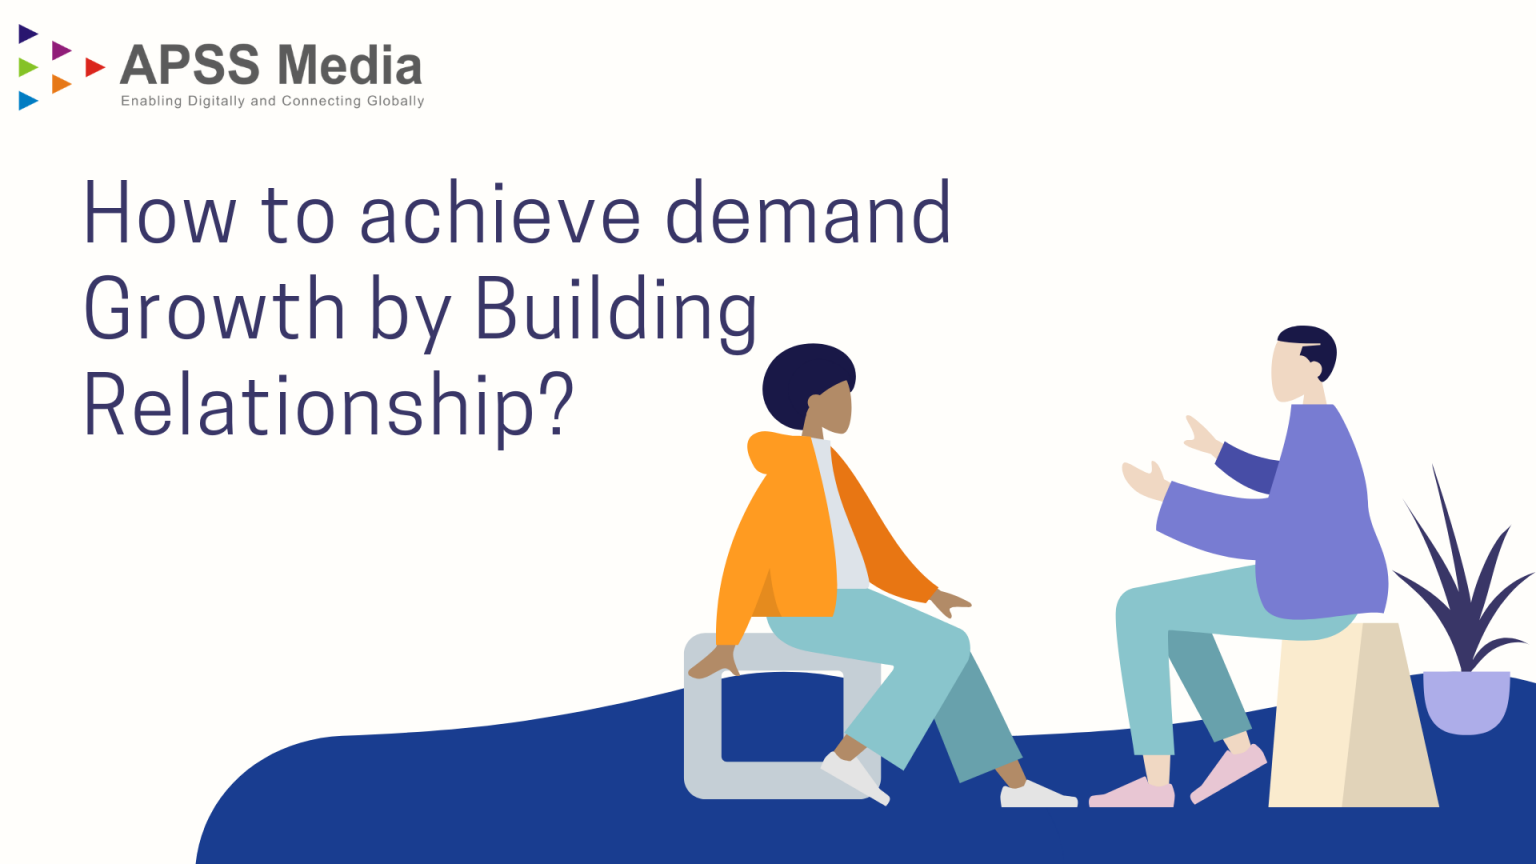 How to achieve demand Growth by Building a relationship? - APSS Media